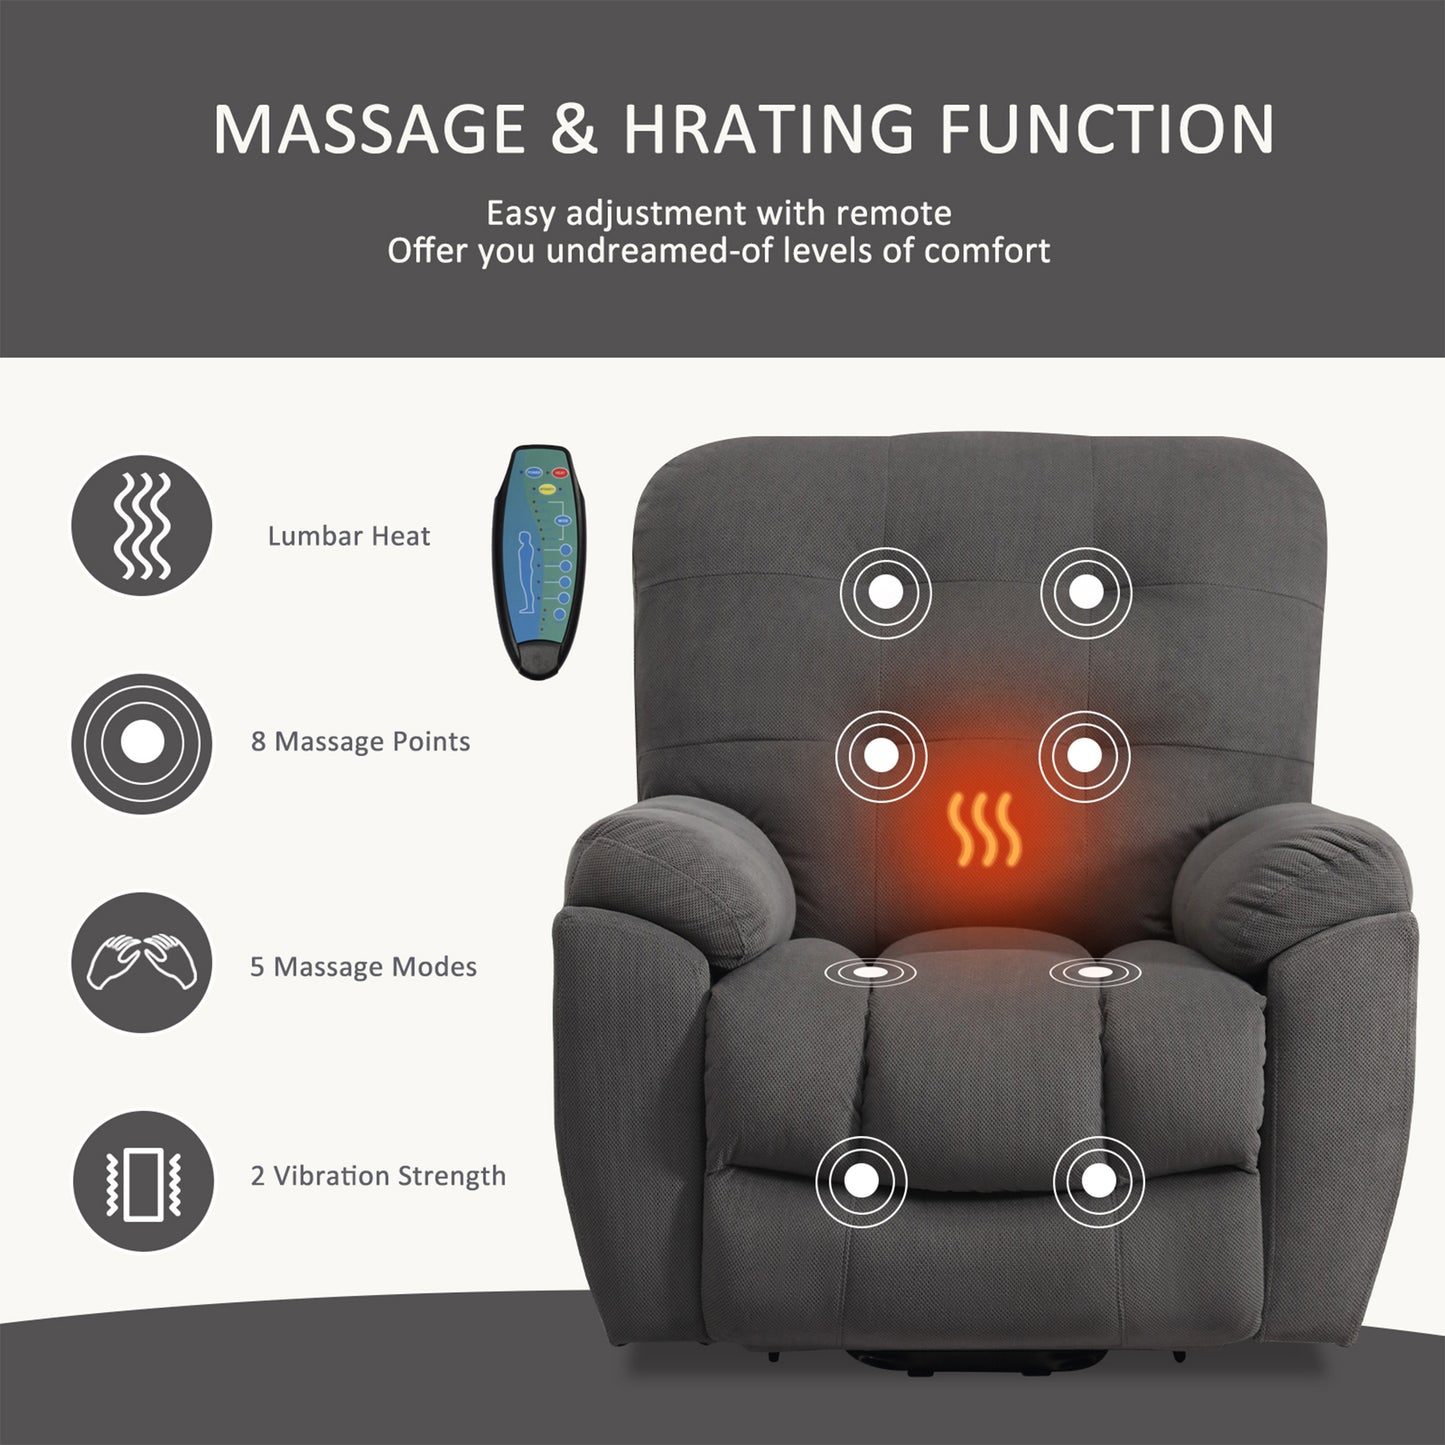 HSUNNS Power Lift Recliner Chair, Modern Recliners with Heat and Massage Function, Side Pocket, USB Charge Port, Recliner Sofa for Living Room, Bedroom, Home Theater, Grey